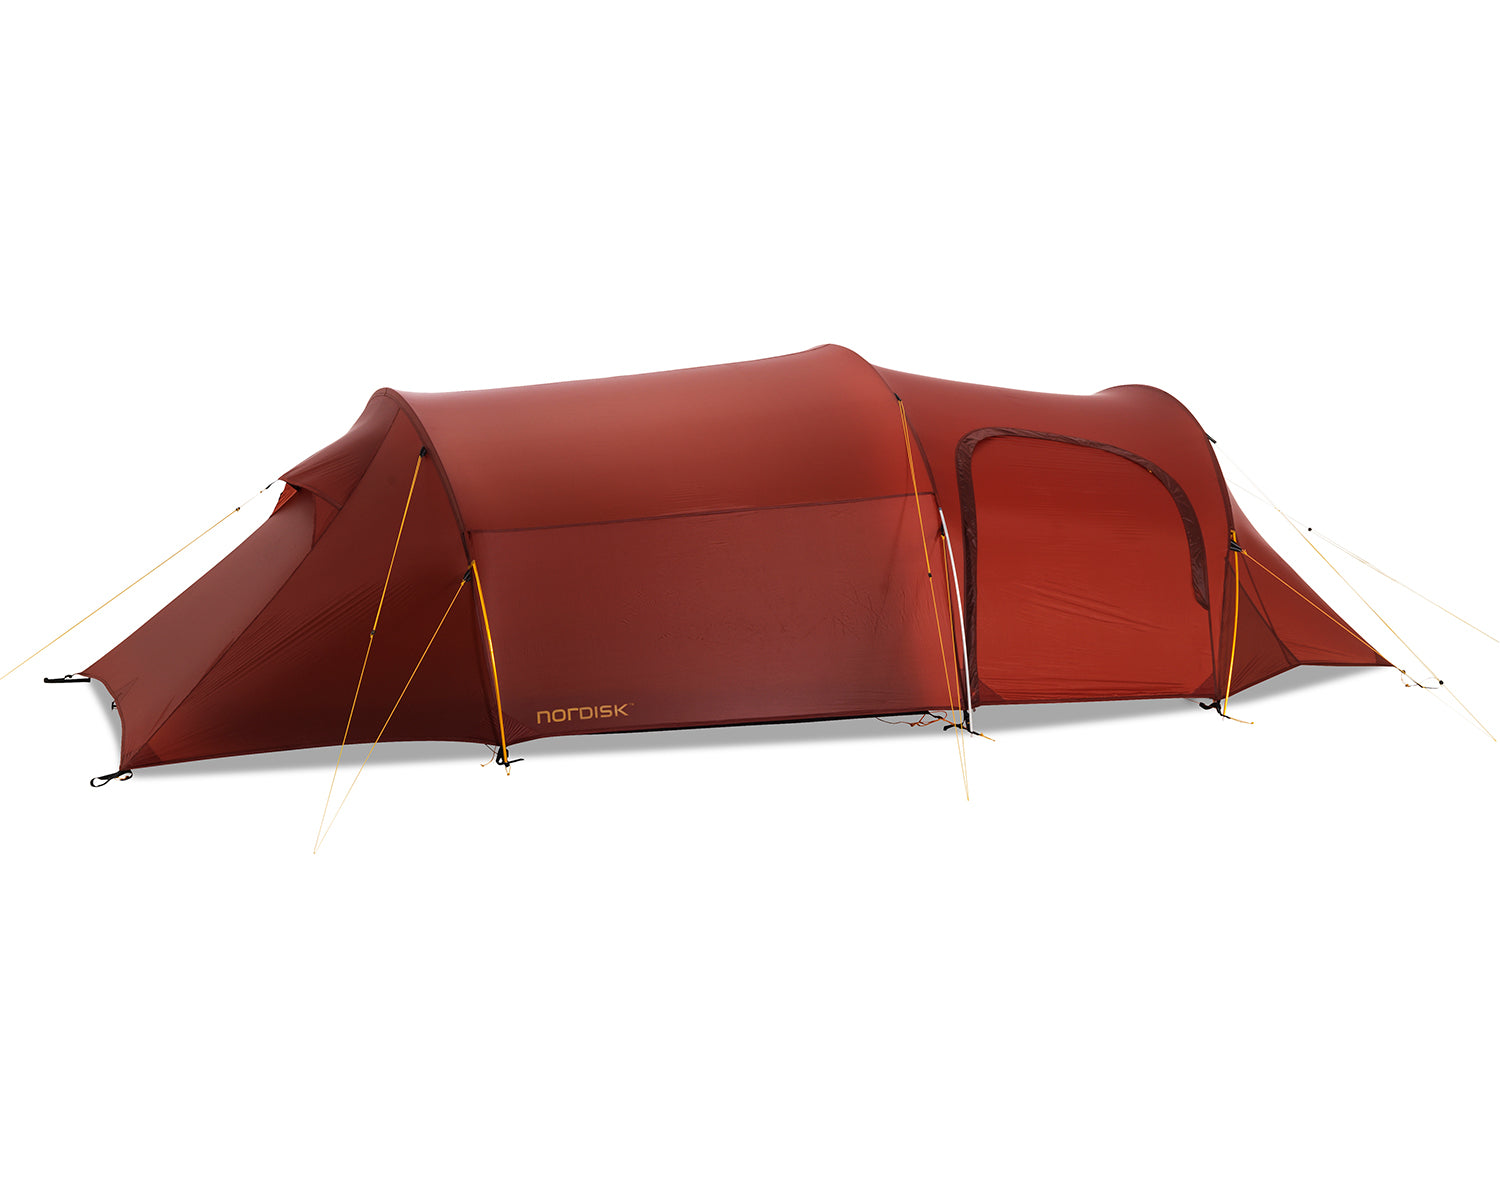 Oppland 3 LW - 3 person - Burnt Red